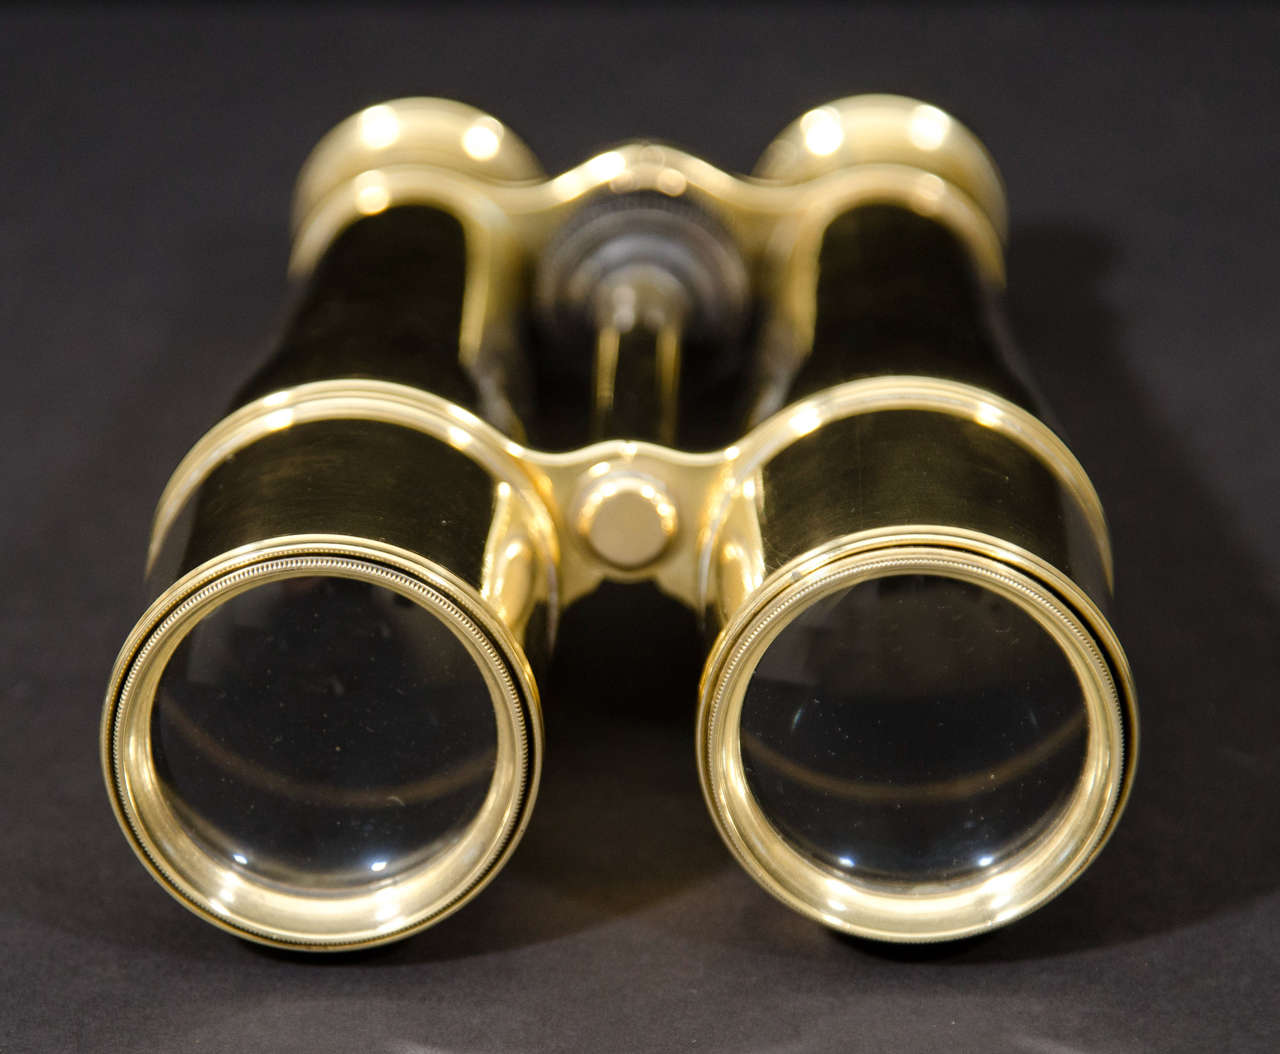 Polished Brass Telescoping Binoculars with Numbered Viewing Placements Engraved in the Brass.